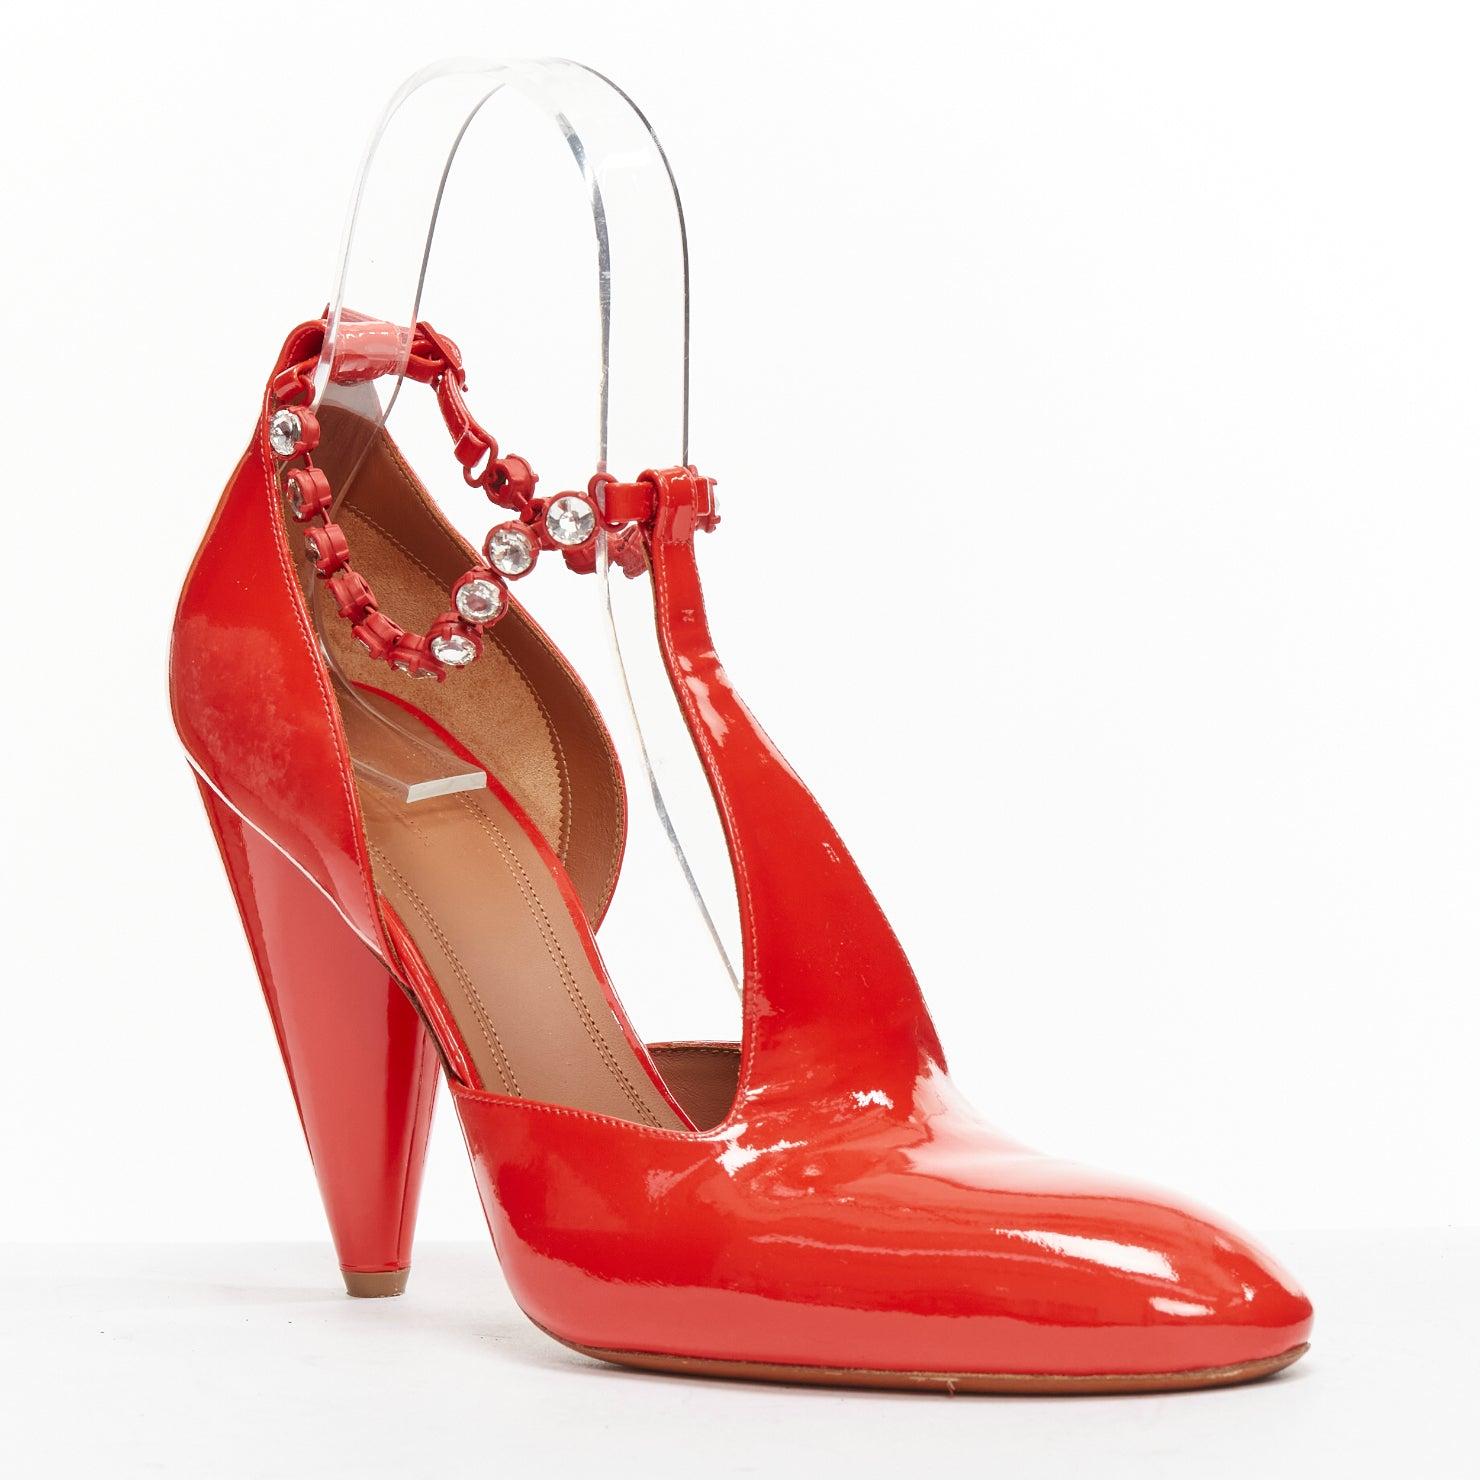 OLD CELINE Phoebe Philo Tango red patent crystal t-strap heels EU38
Reference: TGAS/D00619
Brand: Celine
Designer: Phoebe Philo
Model: Tango
Collection: Runway
Material: Leather
Color: Red
Pattern: Solid
Closure: Ankle Strap
Lining: Brown